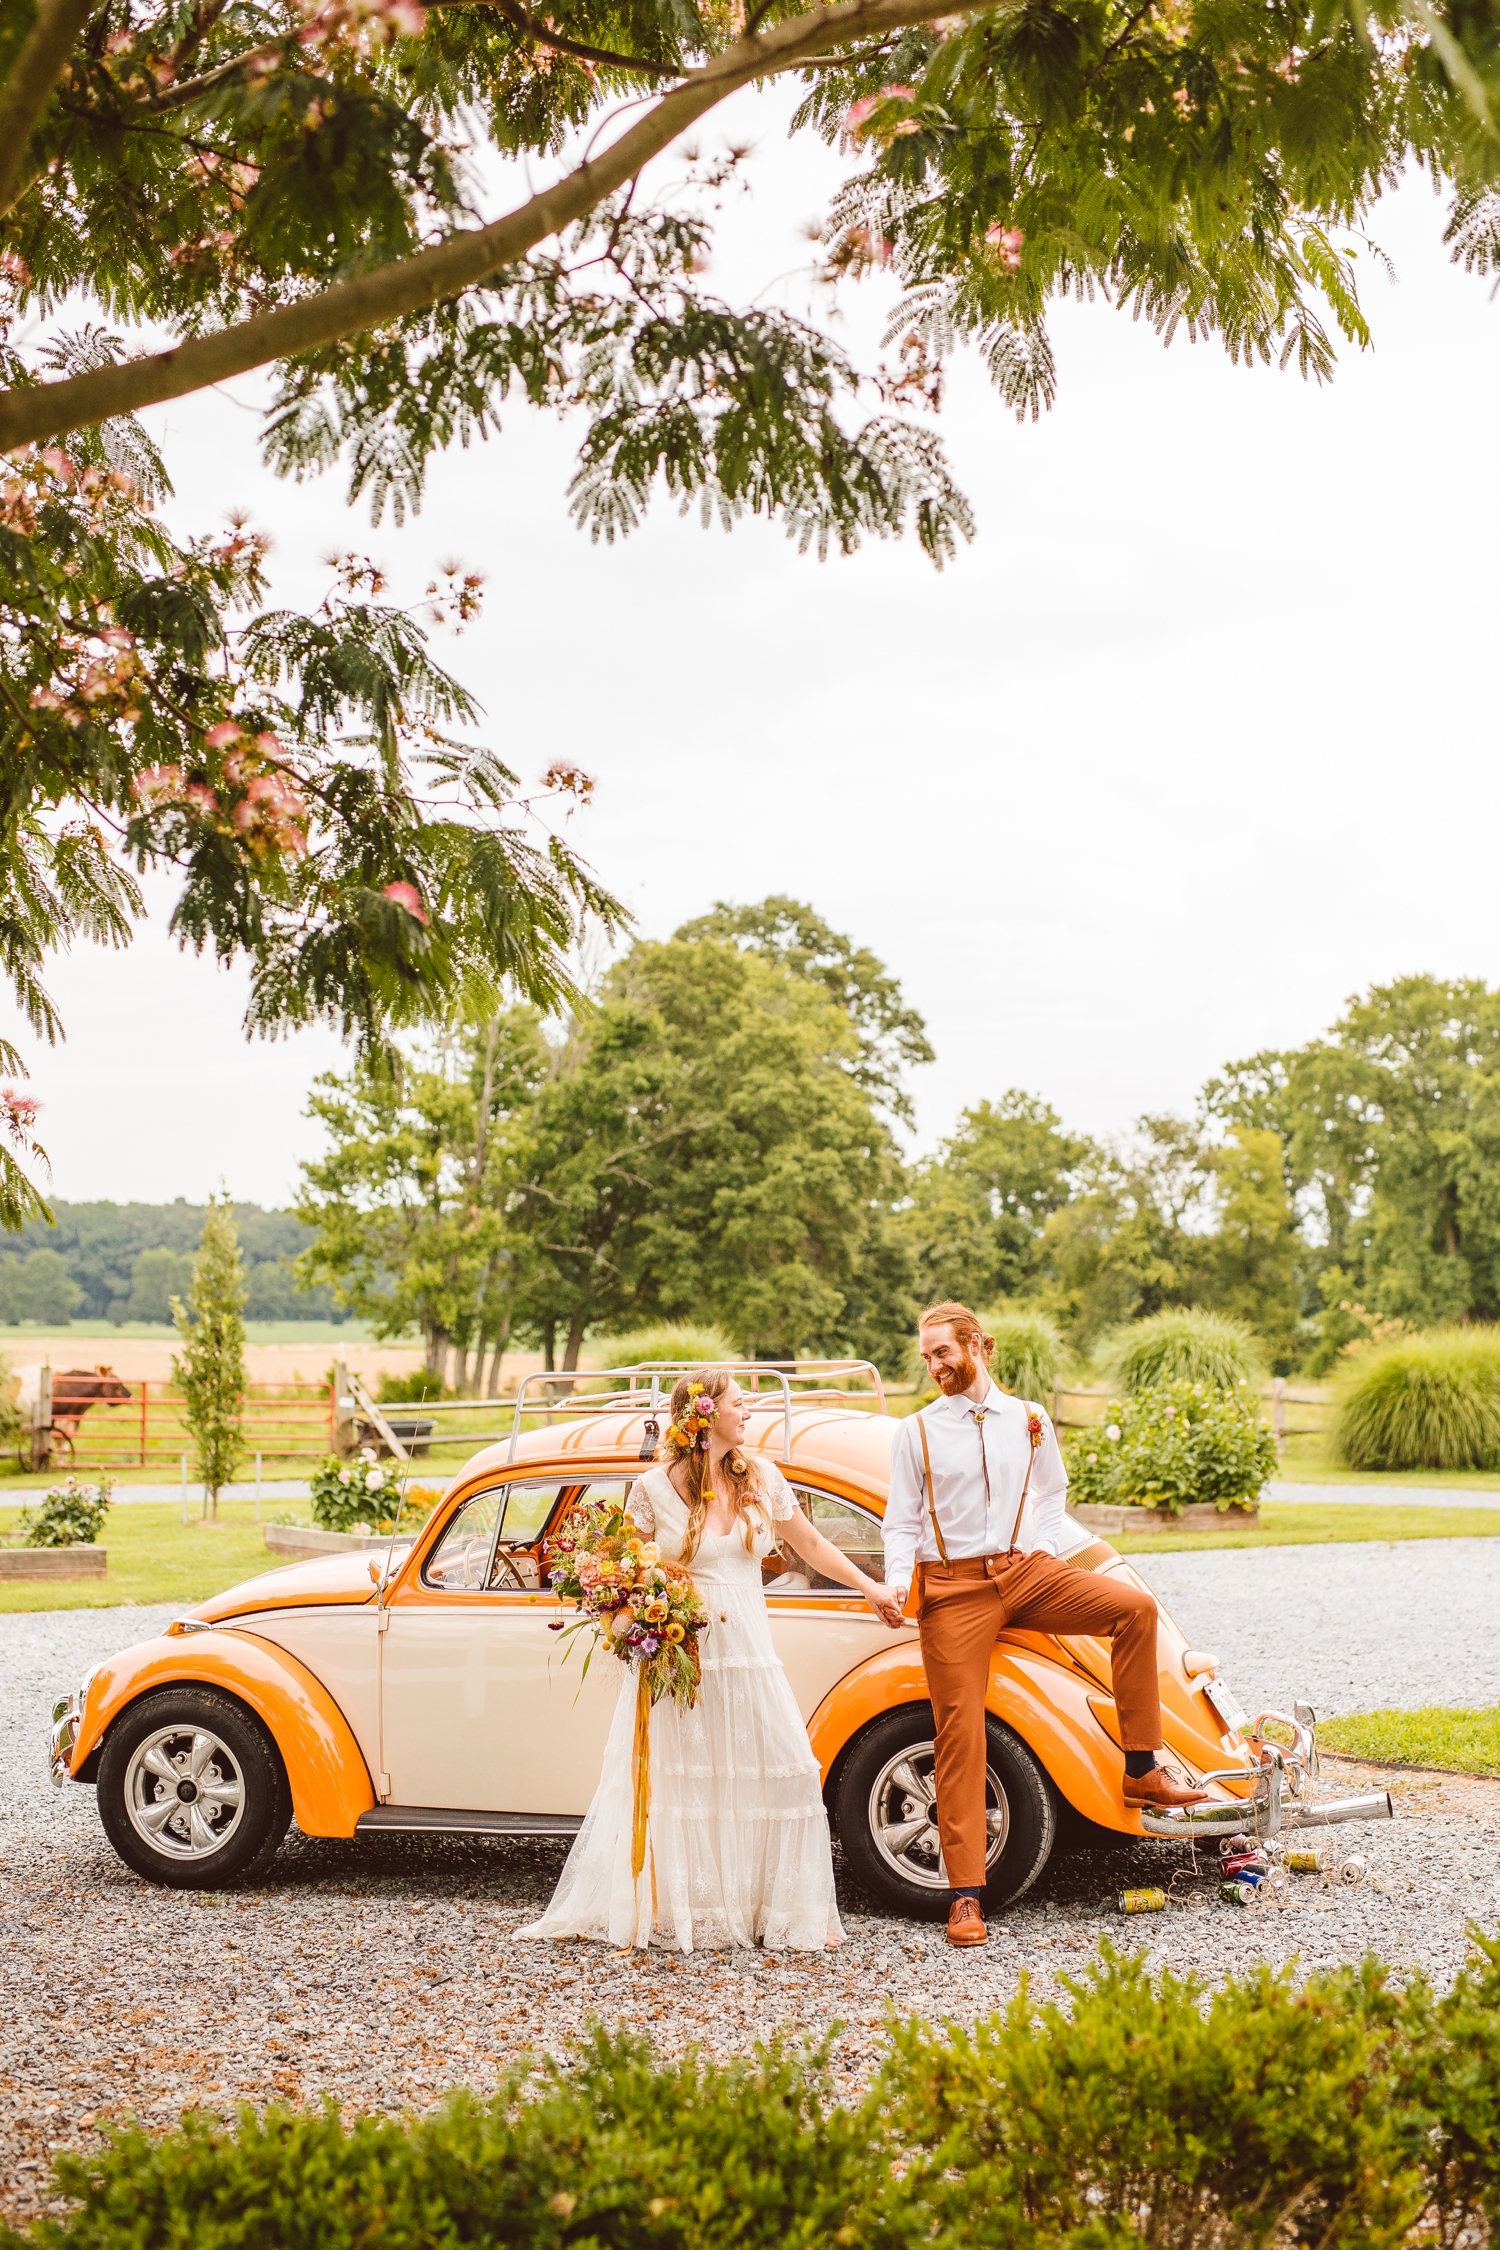 Bride and groom holding hands in front of vintage VW bug | Brooke Michelle Photography